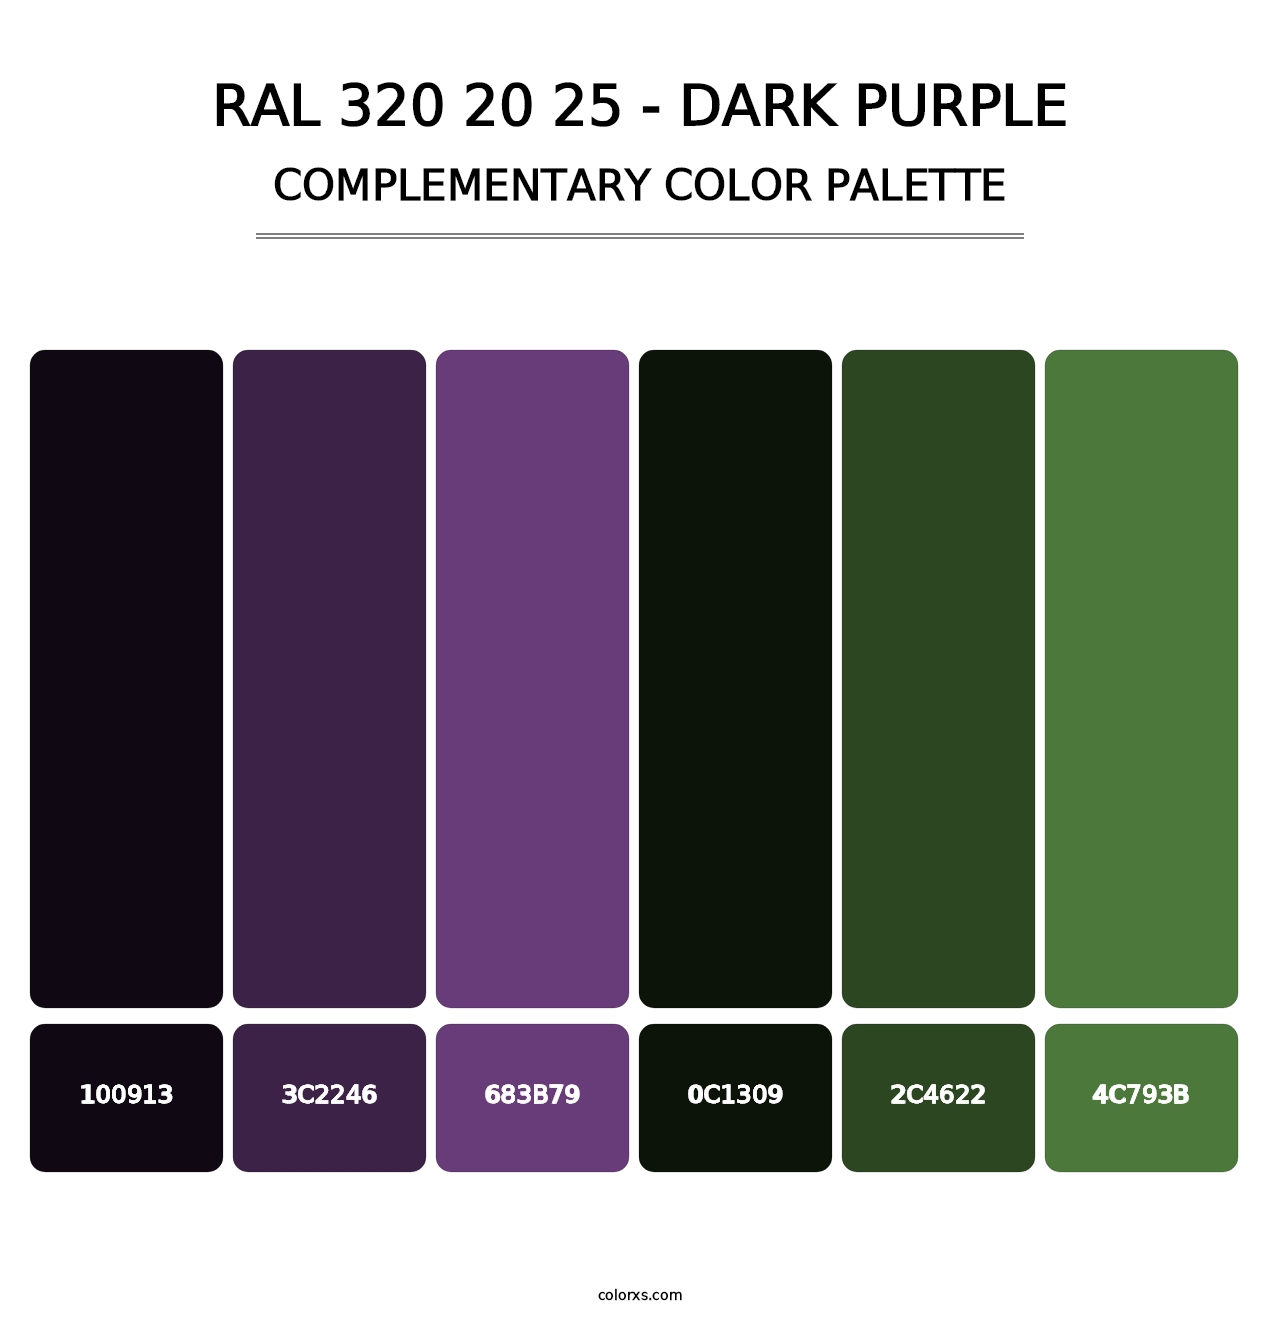 RAL 320 20 25 - Dark Purple - Complementary Color Palette